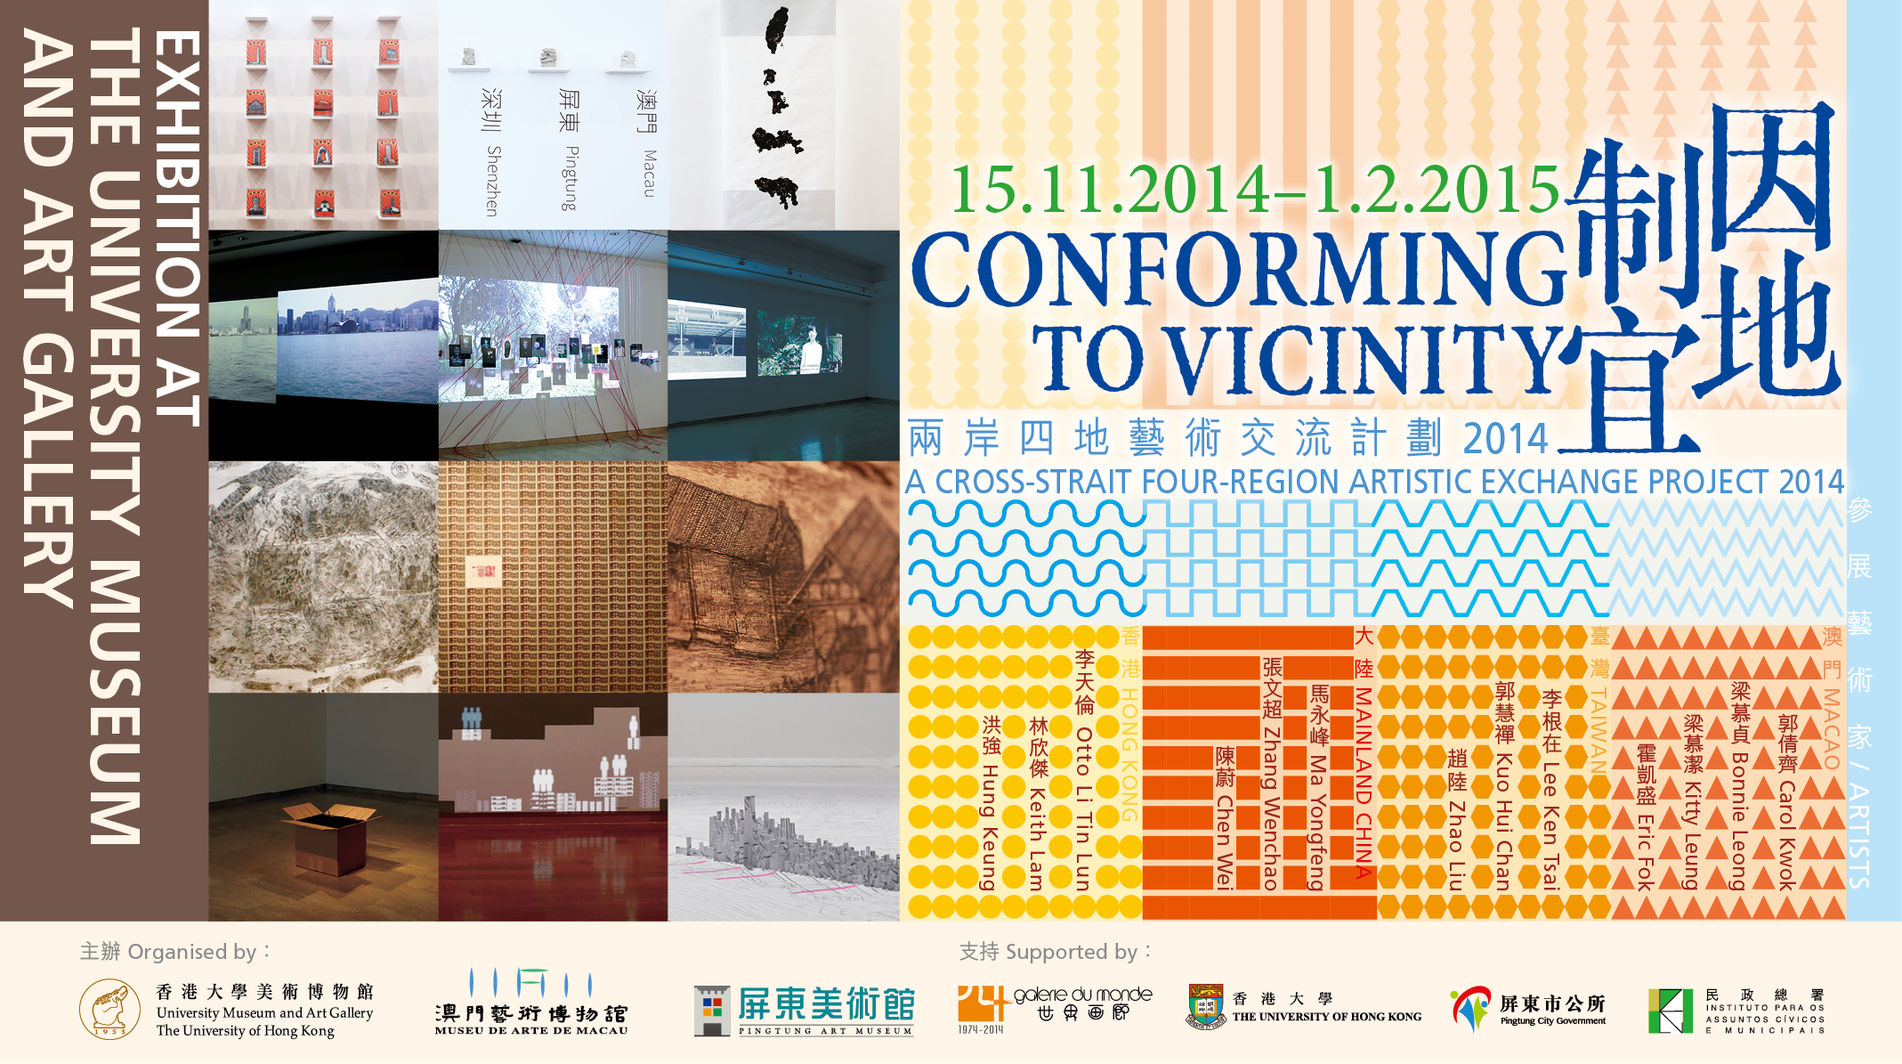 Conforming to Vicinity: A Cross-Strait Four-Region Artistic Exchange Project 2014